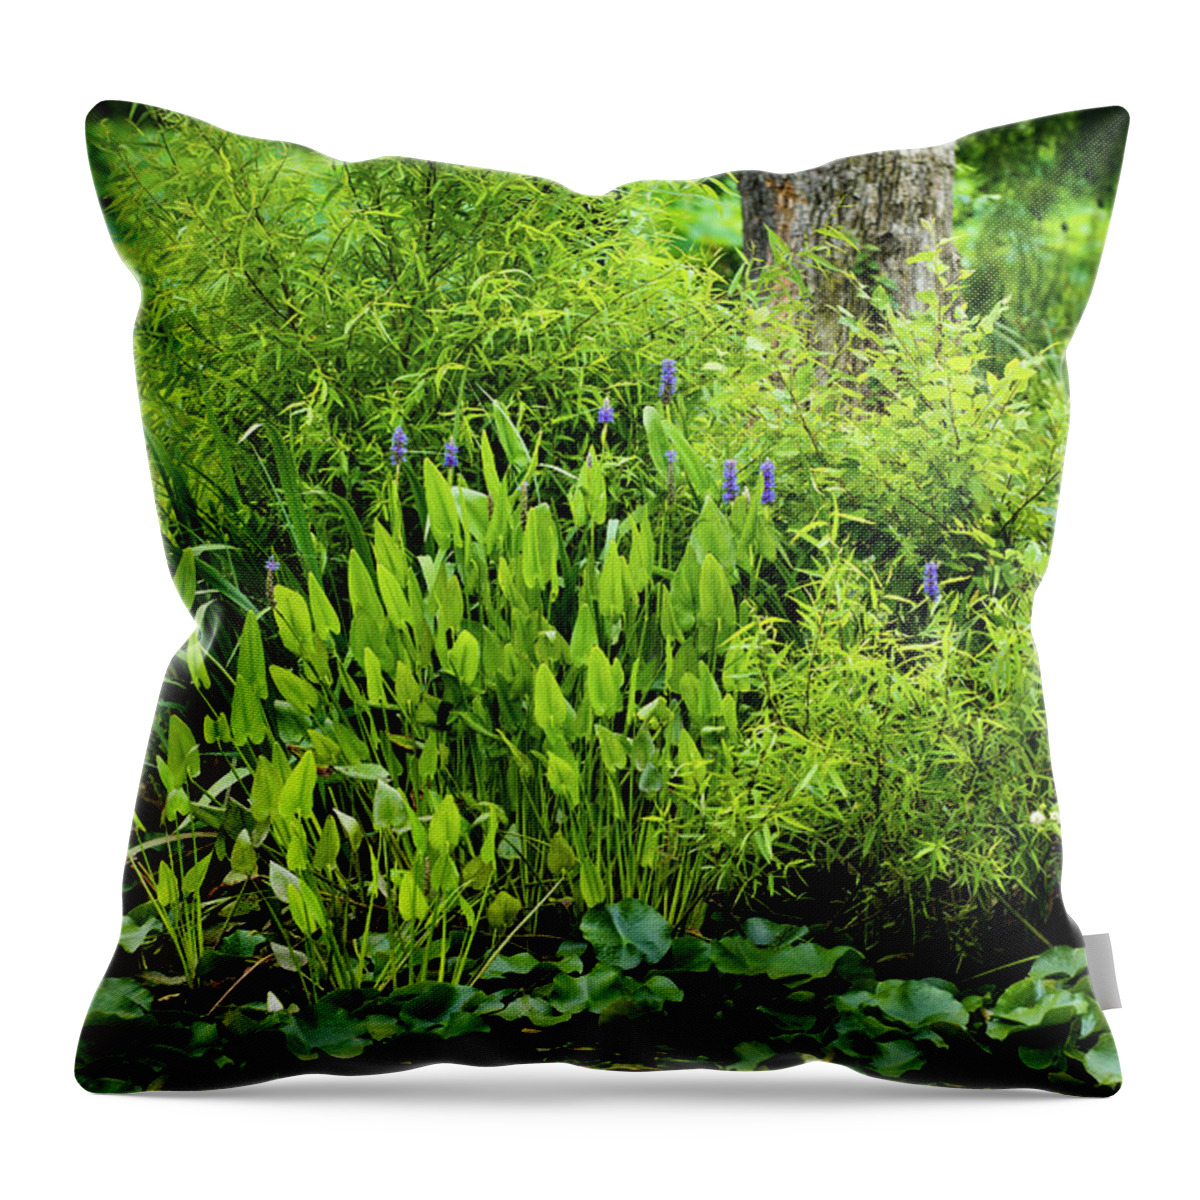 Bloom Throw Pillow featuring the photograph Purple Flowers by the Ponds Edge by Dennis Dame